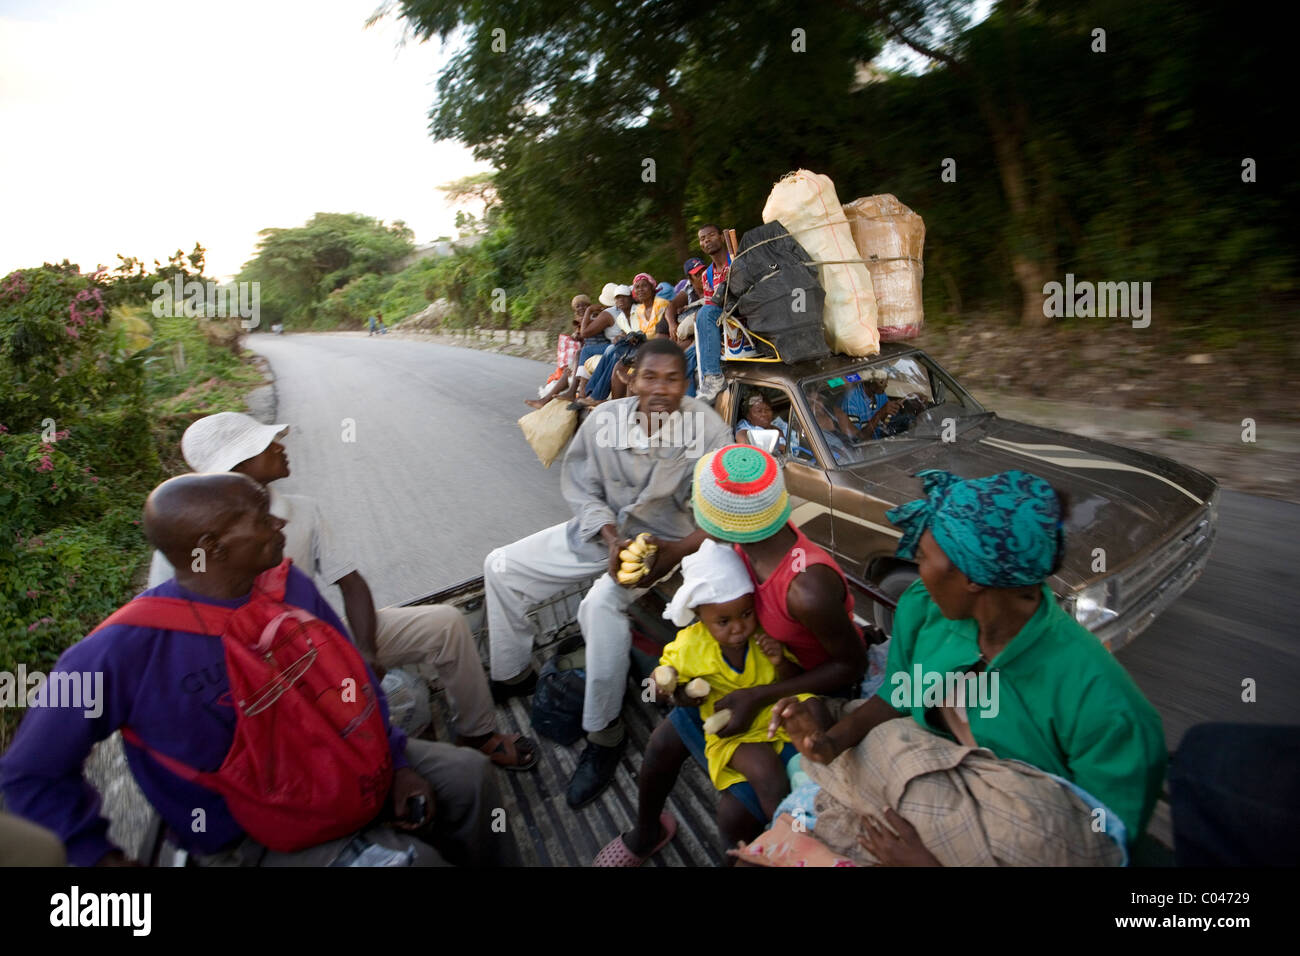 Tap-taps, Haitian public transport vehicles, speed down a highway outside Goniaves, Haiti. Stock Photo